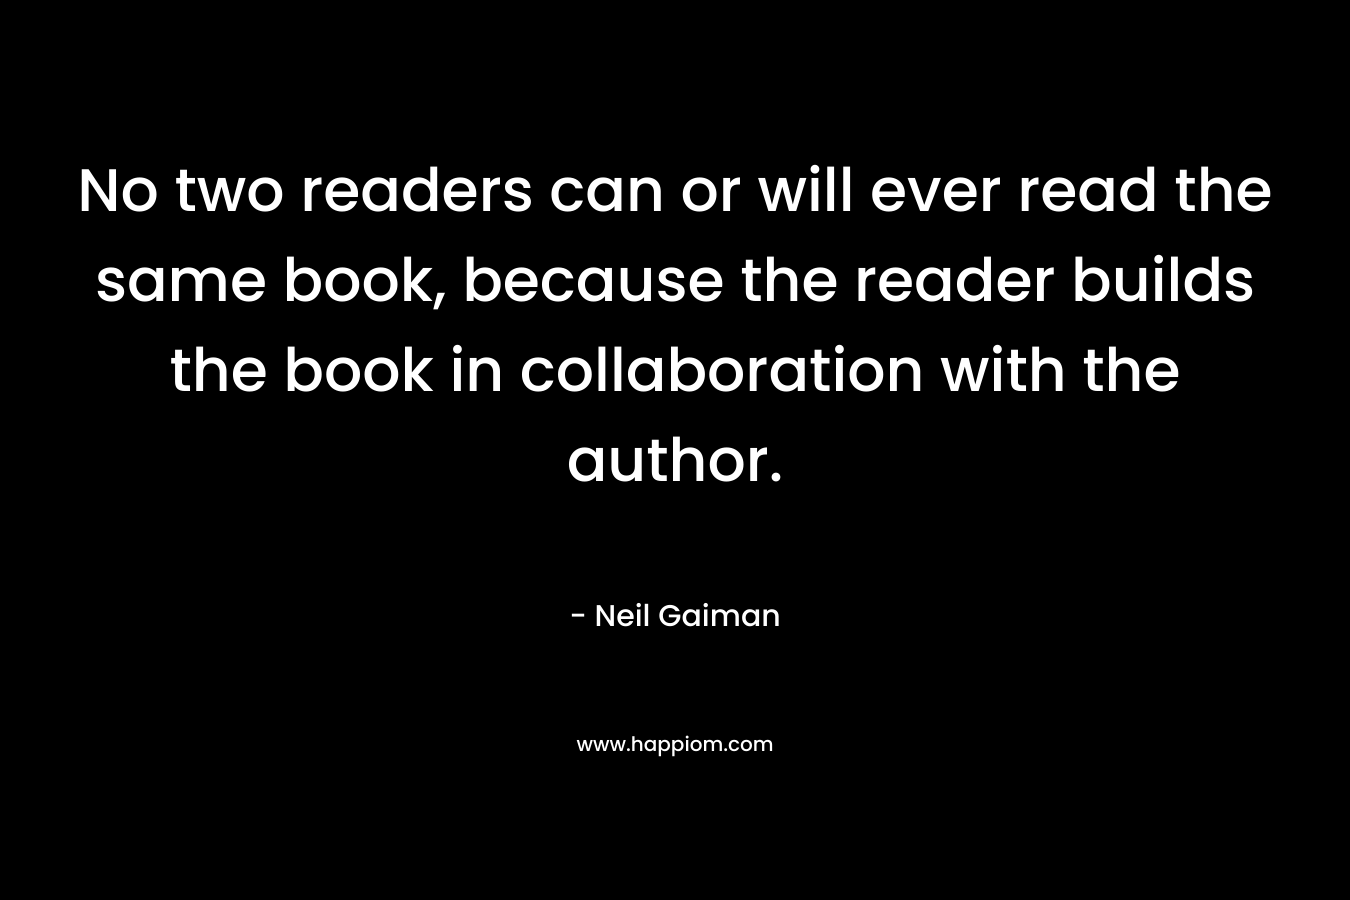 No two readers can or will ever read the same book, because the reader builds the book in collaboration with the author.